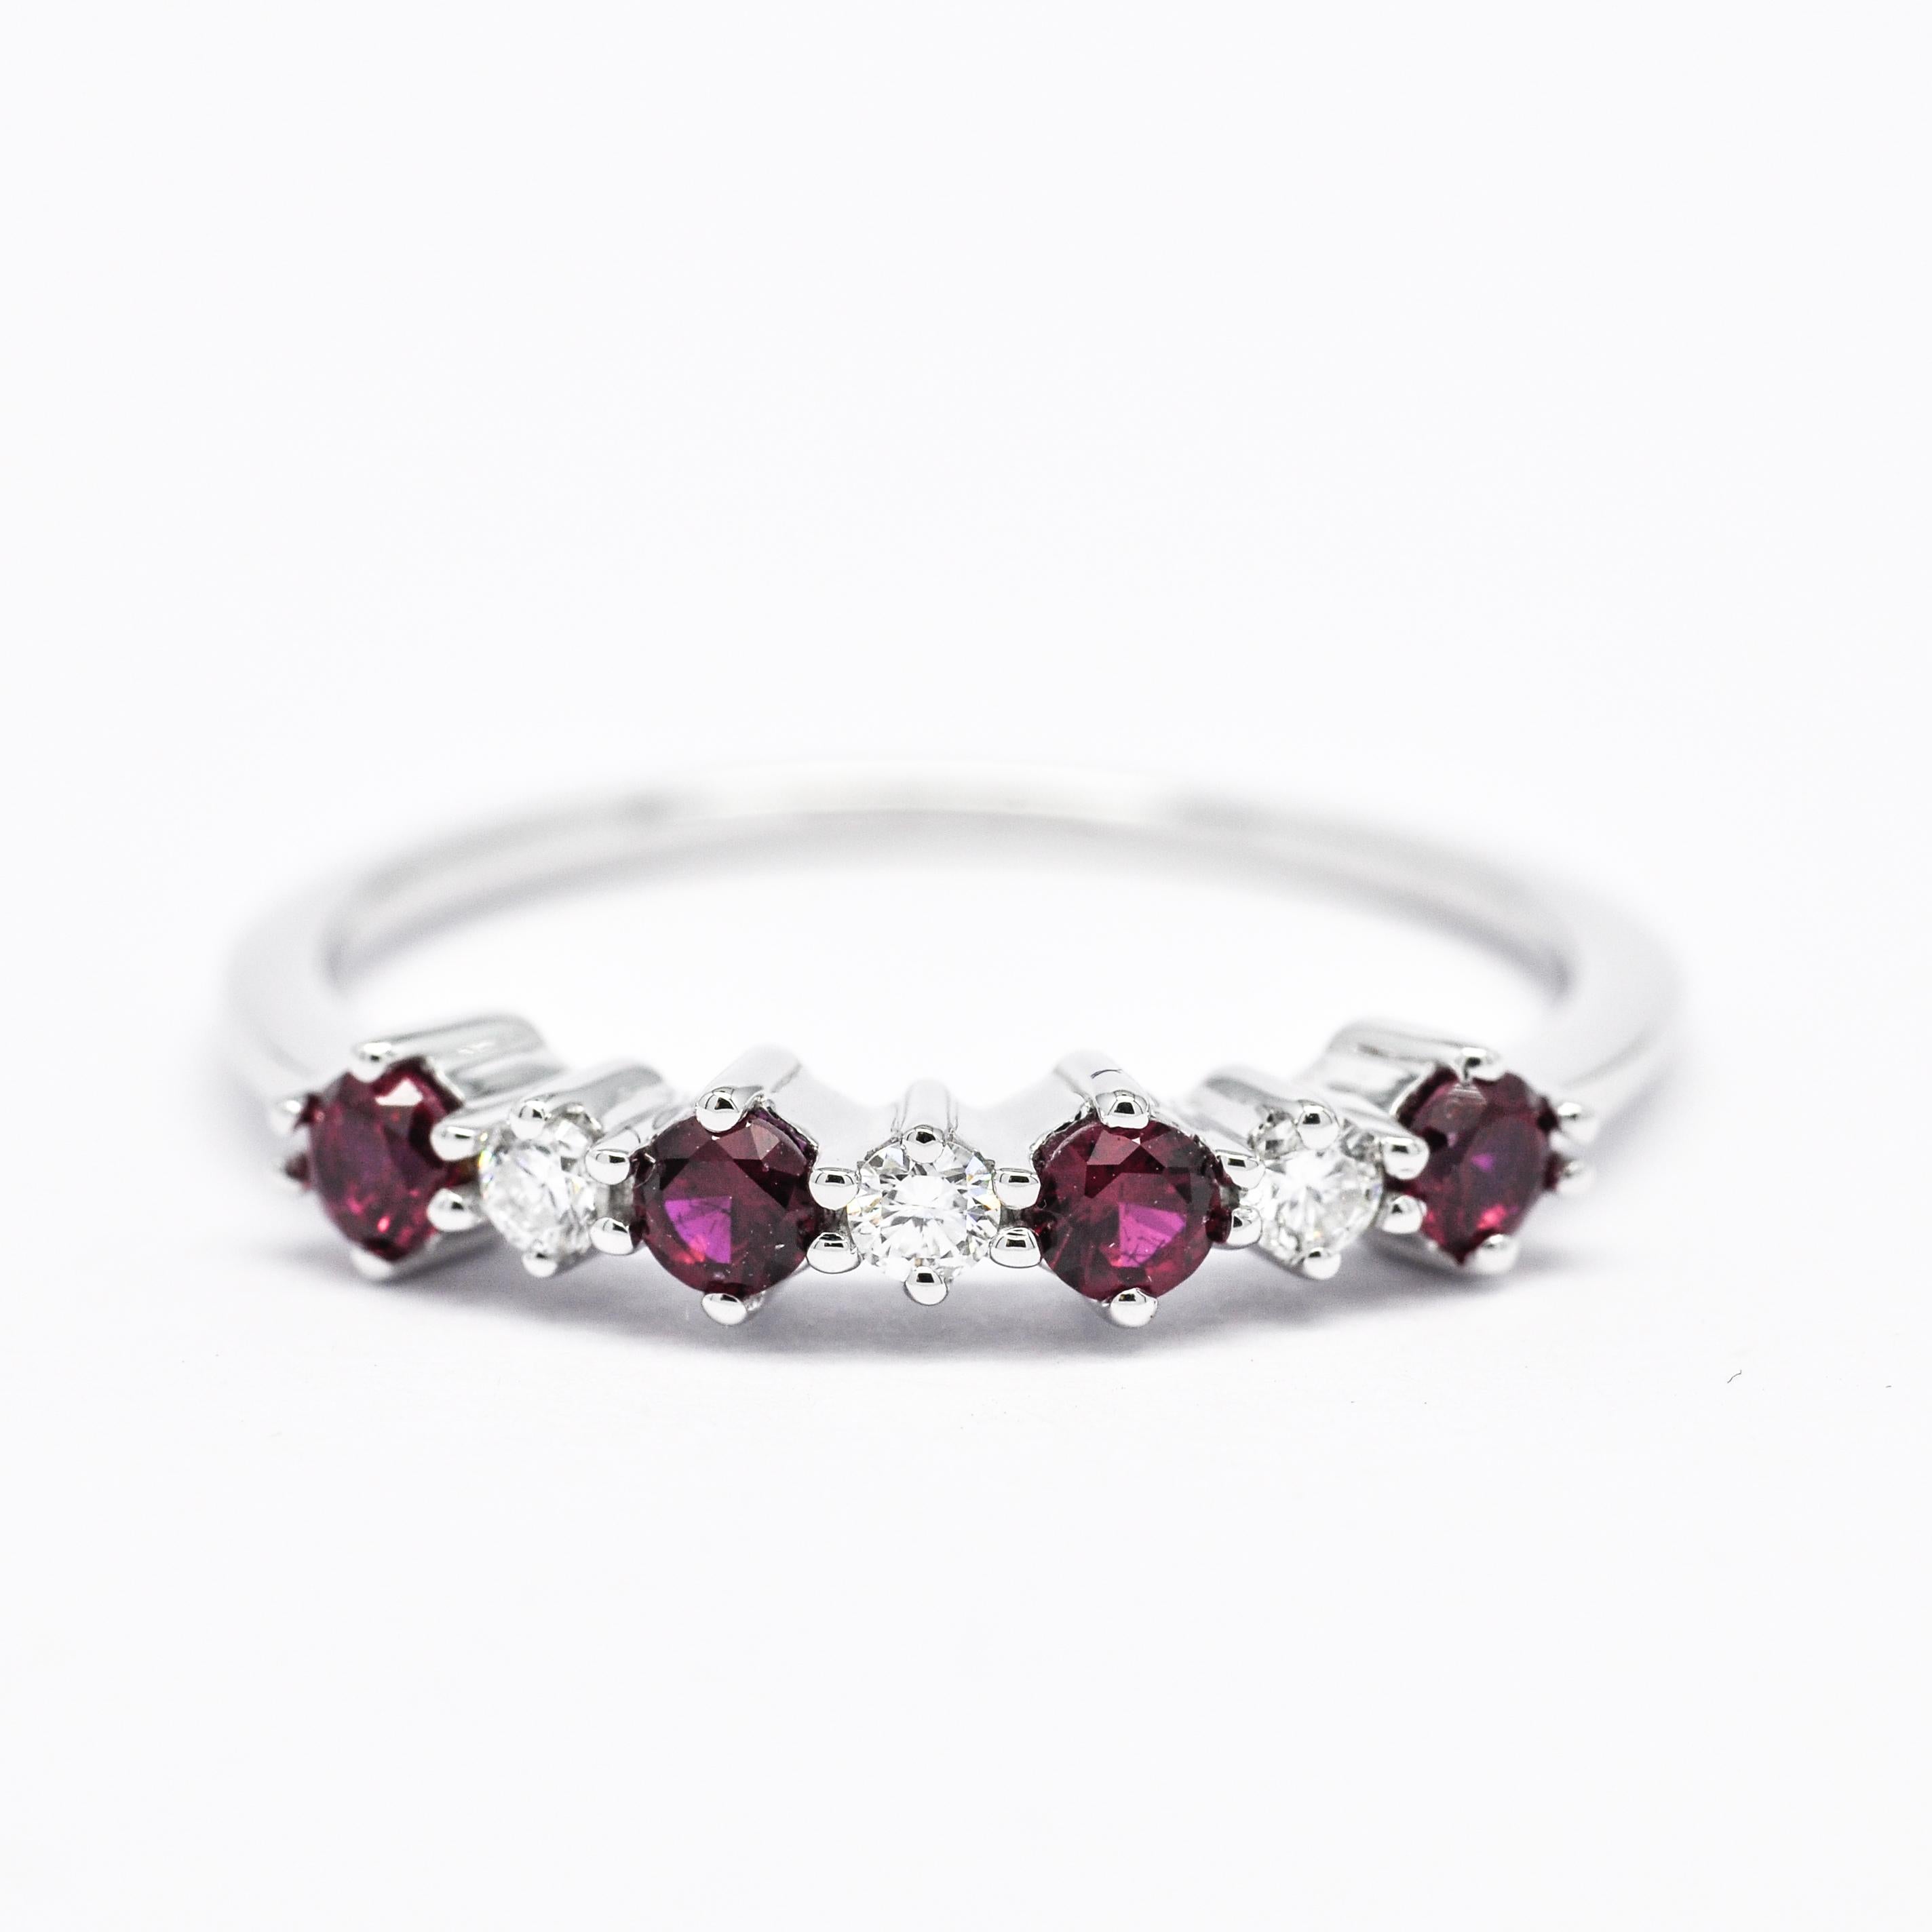 The addition of Synthetic Red Color Rubies and Diamonds 18kt White Gold Ring enhances its allure and symbolism, making it an even more enchanting choice for both engagement and anniversary purposes.

The synthetic ruby red color, symbolizing